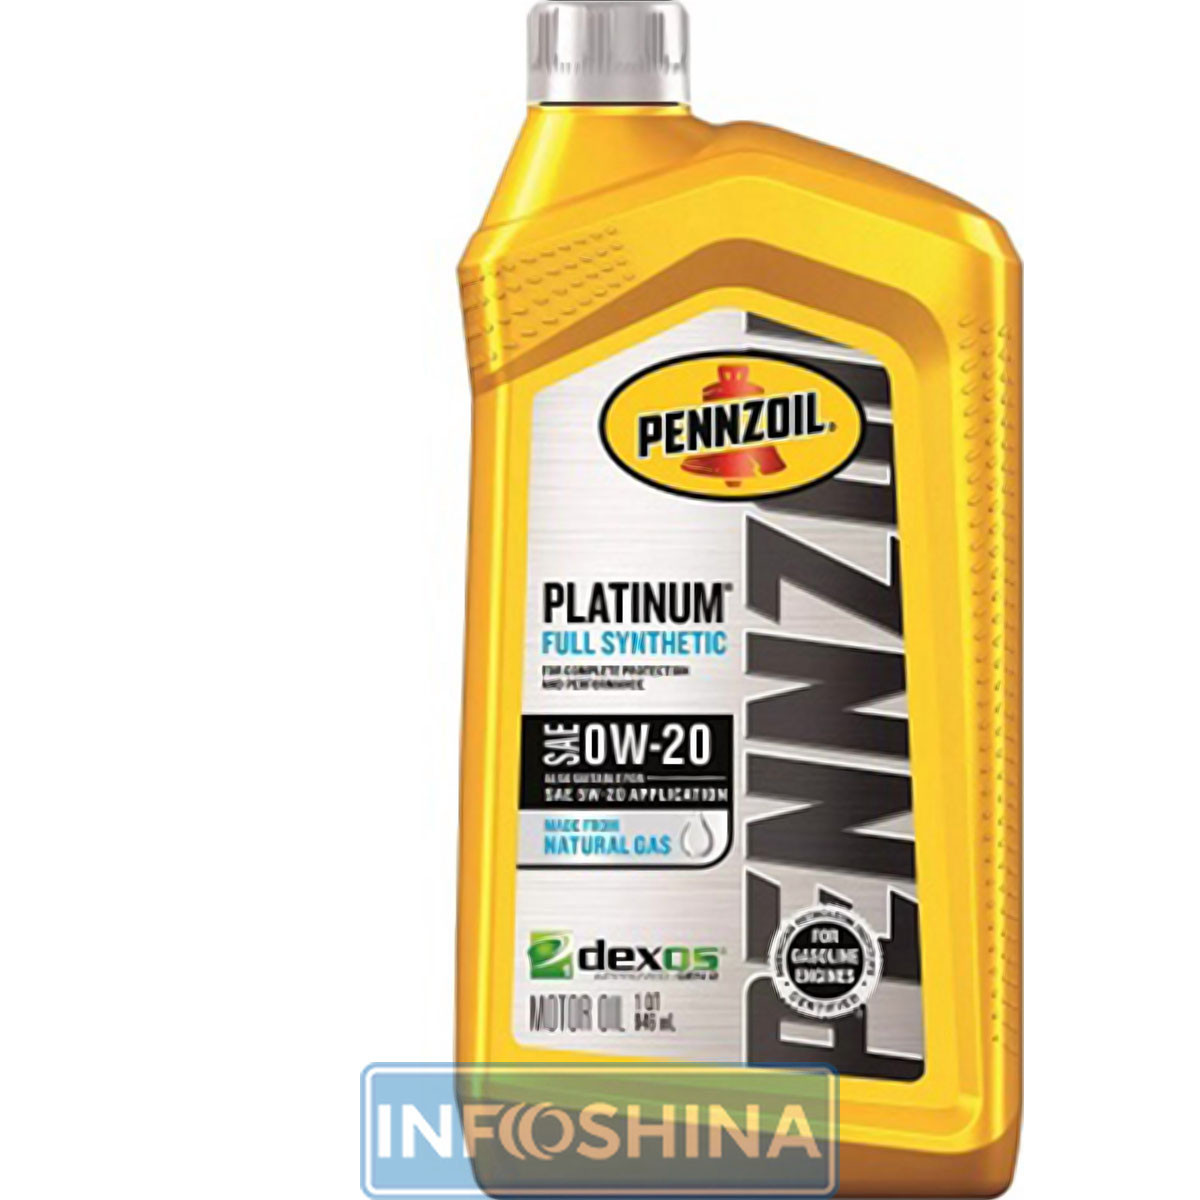 Pennzoil Platinum Fully Synthetic 0W-20